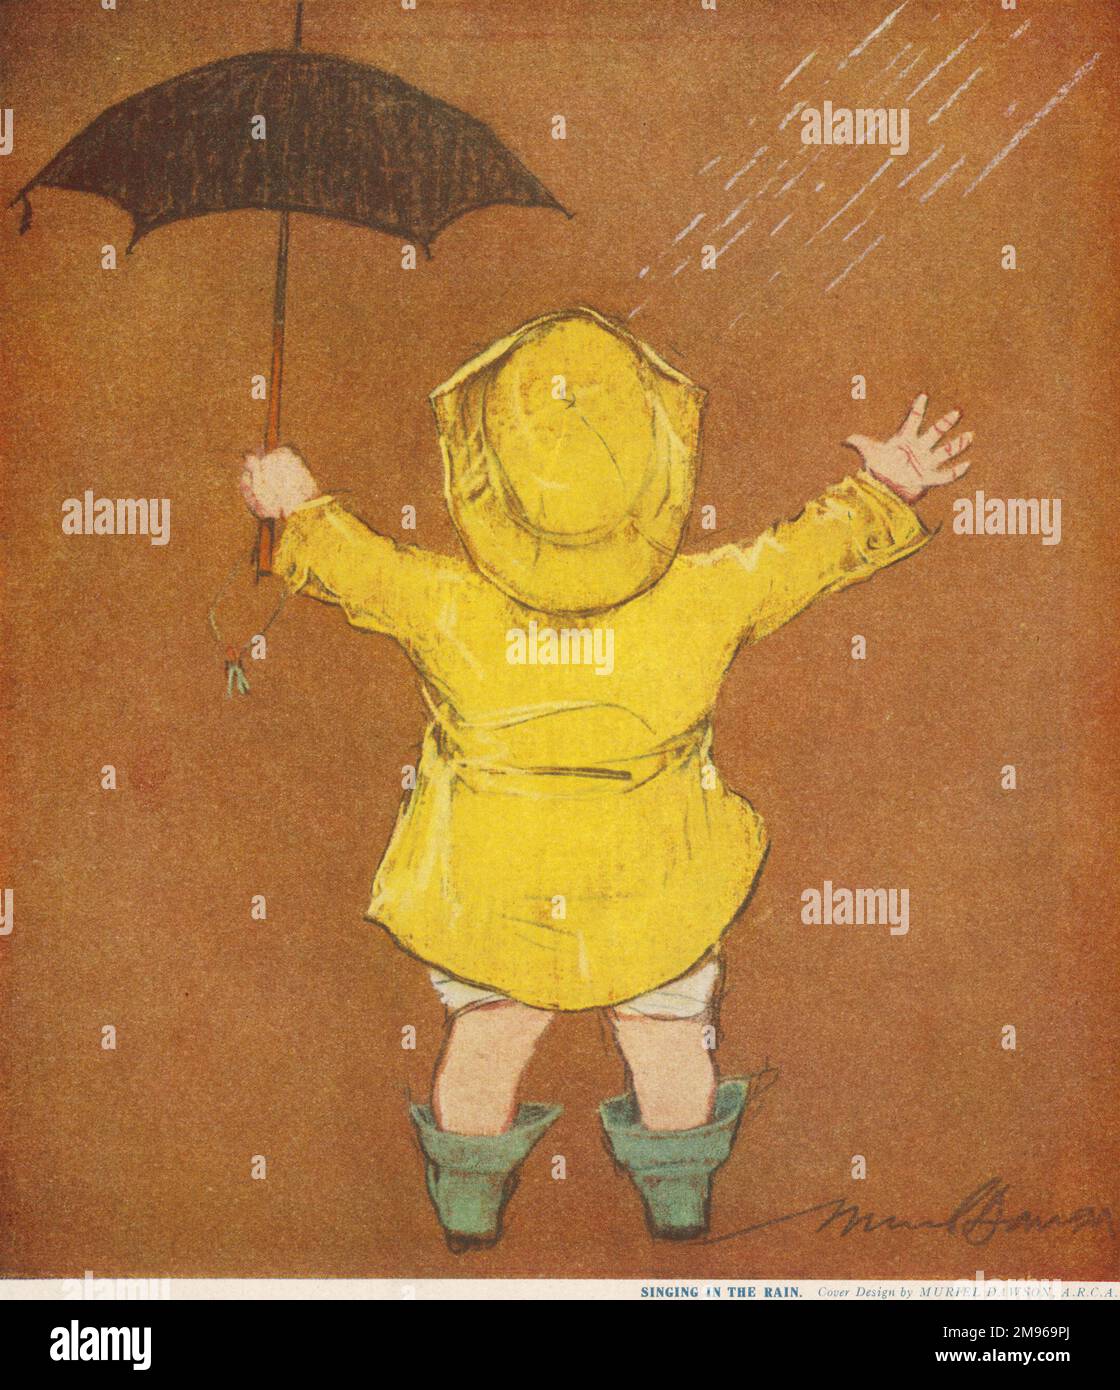 A small child wearing a classic yellow raincoat and sou'wester, holds a miniature umbrella and appears to be enjoying the rain. Stock Photo